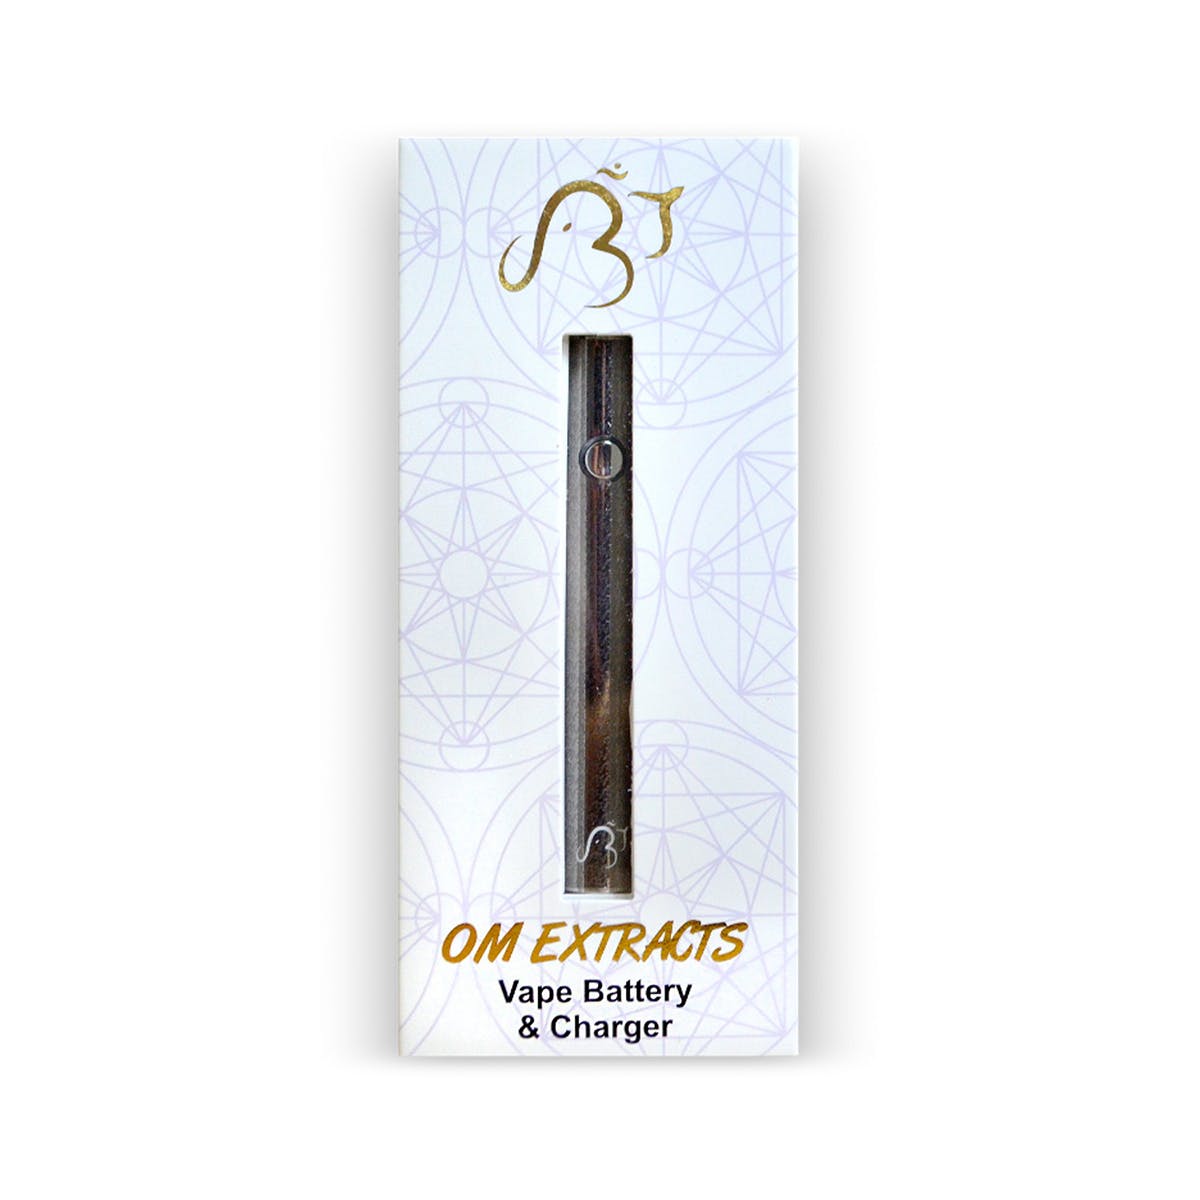 gear-om-extracts-om-extracts-adjustable-vape-battery